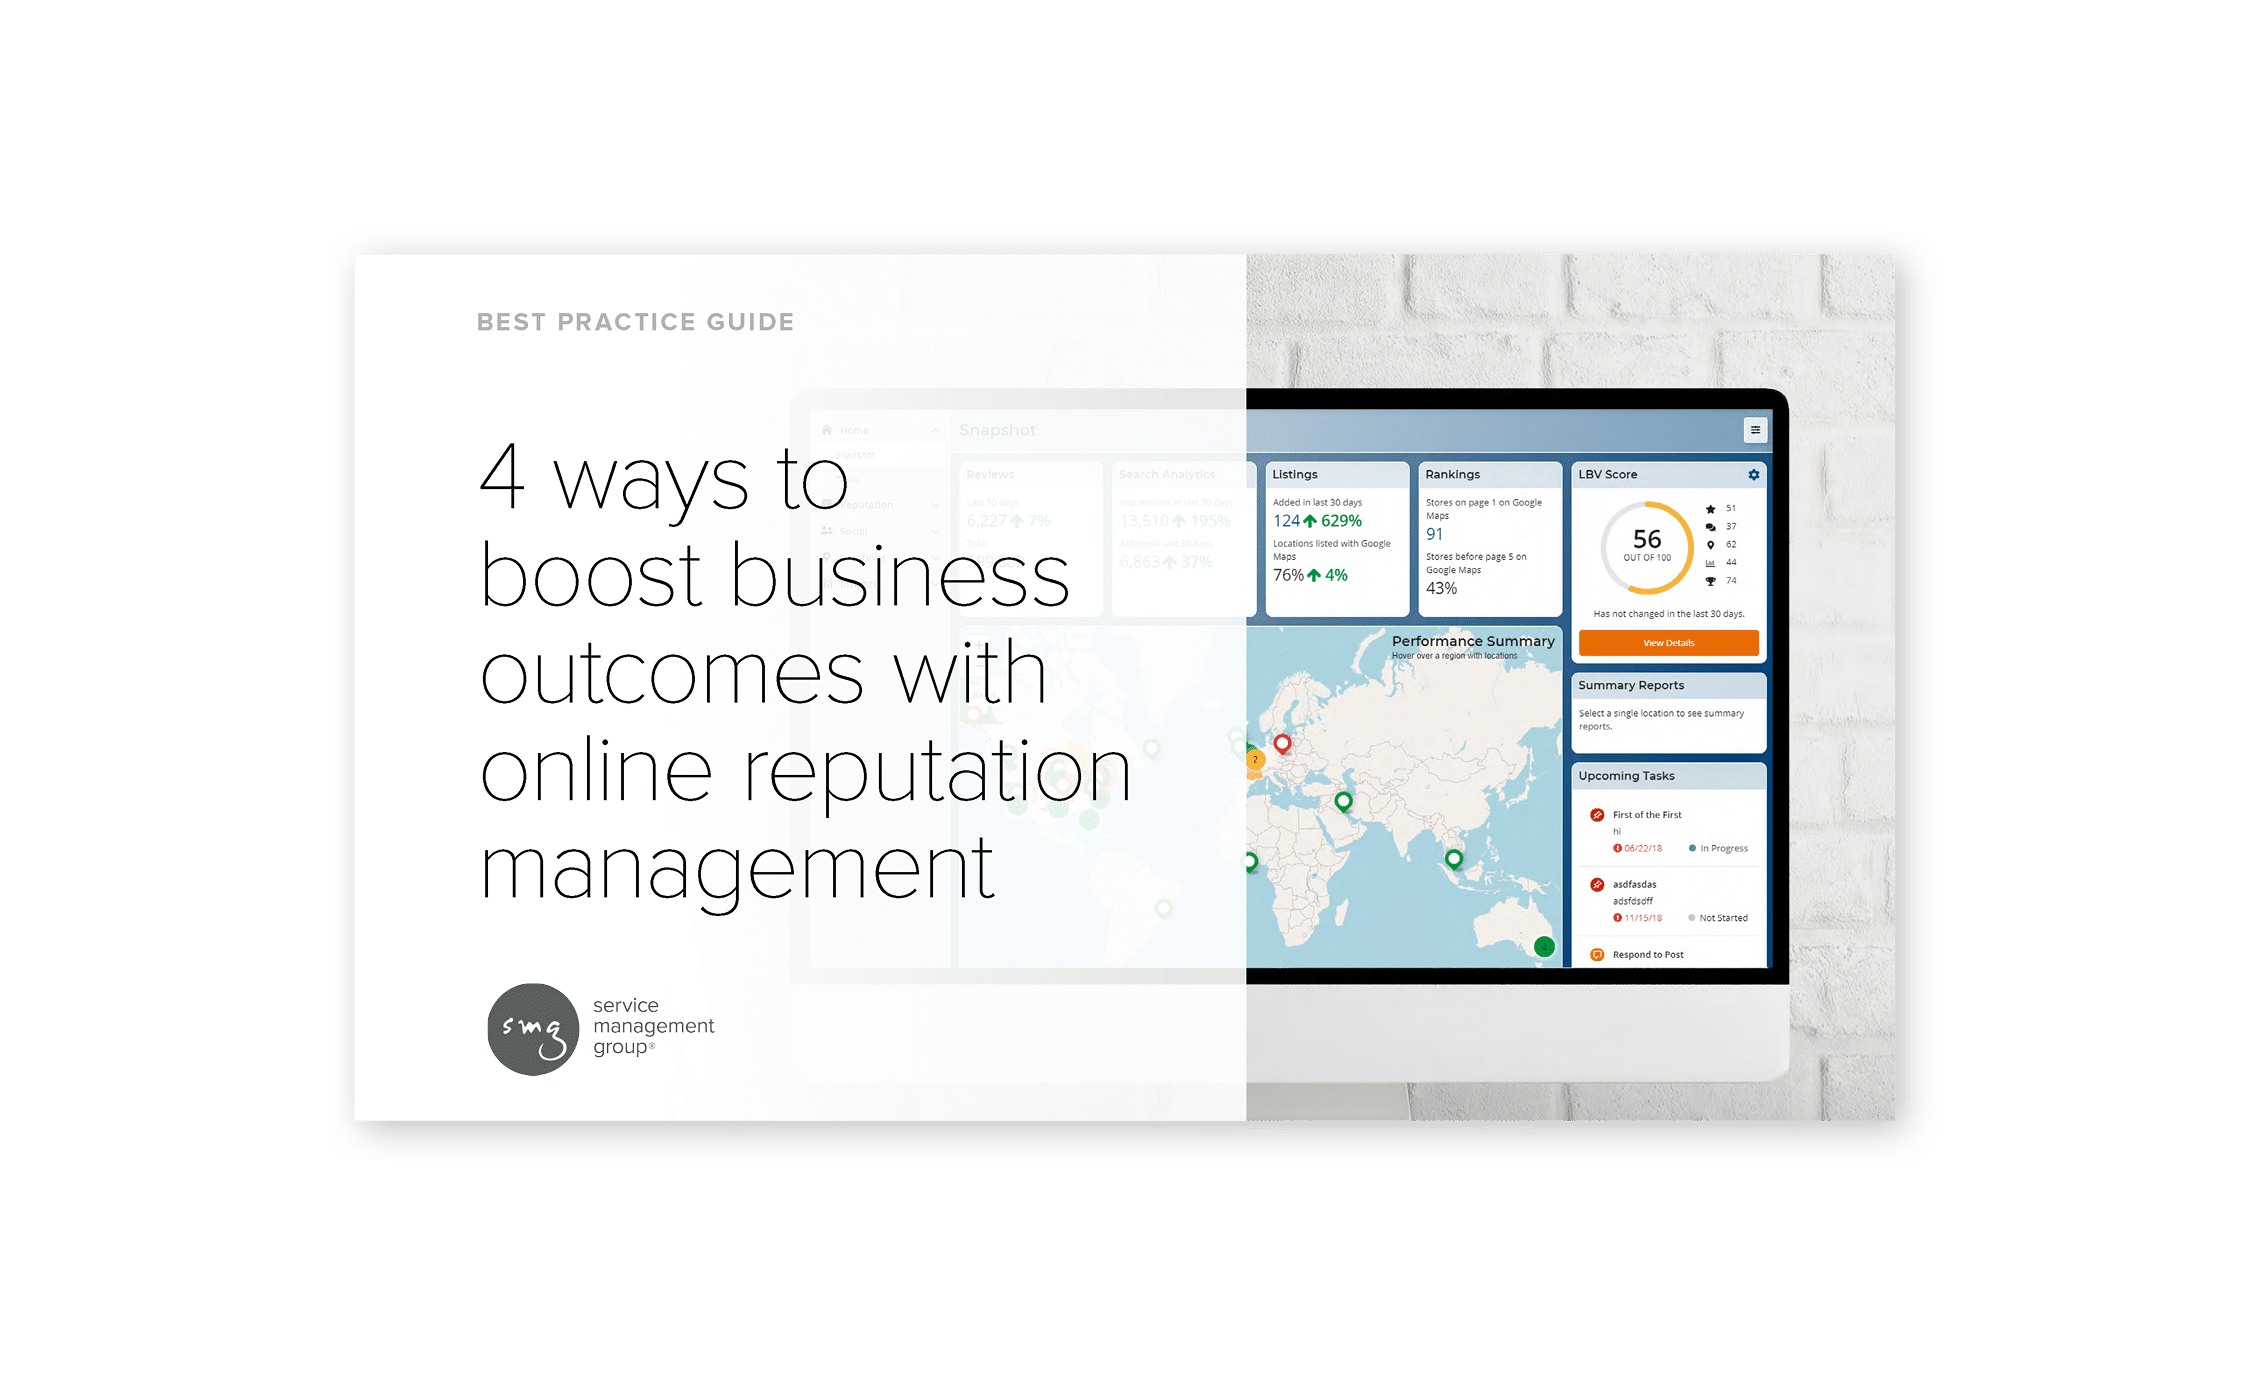 4 ways to boost business outcomes with online reputation management